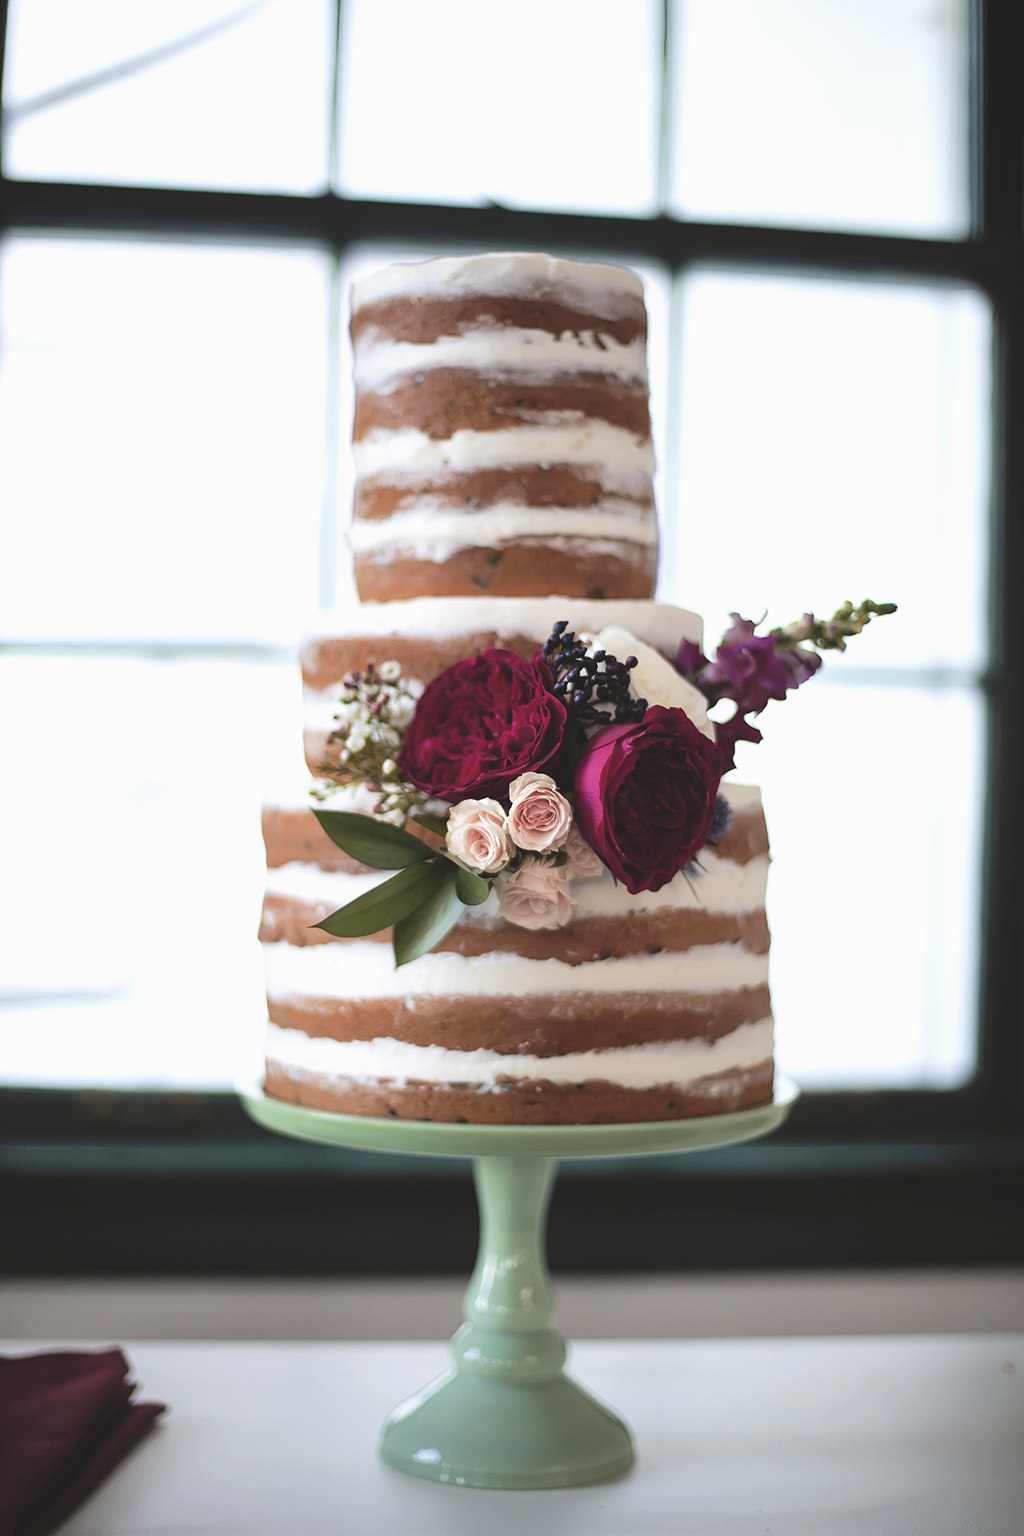 Three Tier Semi Naked Wedding Cake with Maroon and Blush Pink Floral Accent on Turquoise Cake Stand